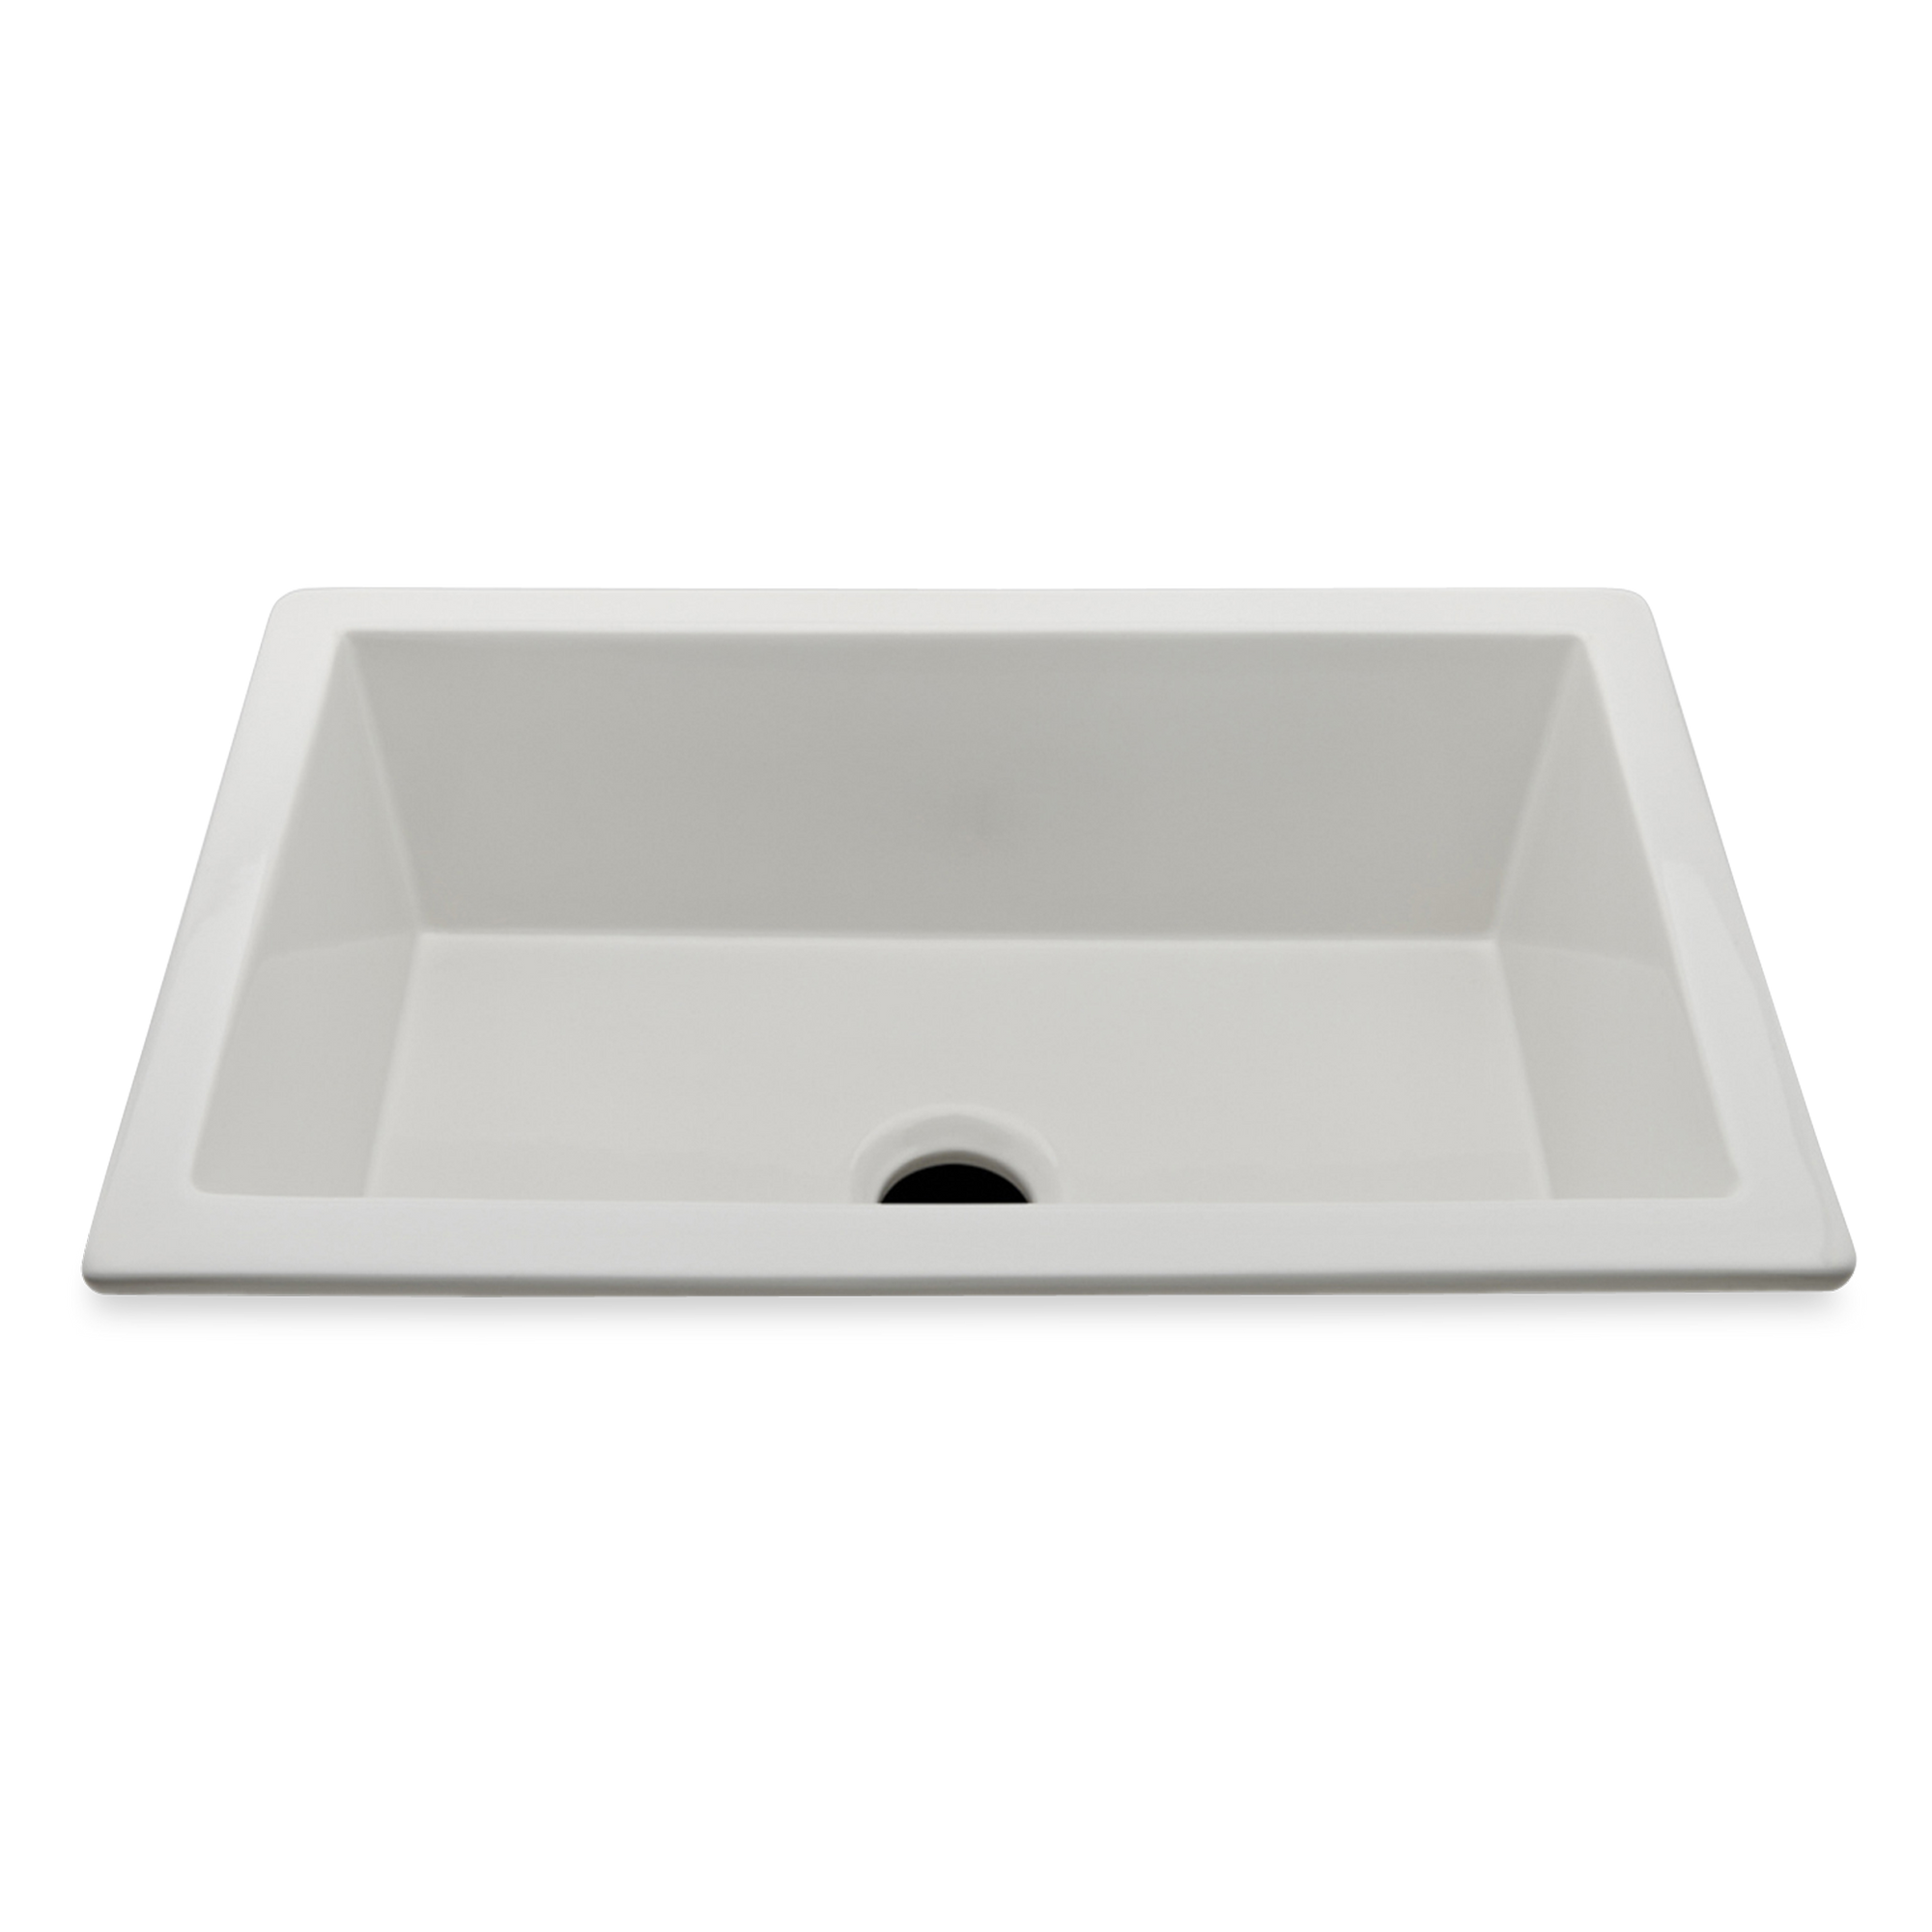 At home in a restored farmhouse or modern beach cottage, these traditional sinks are updated to be practical and utilitarian.